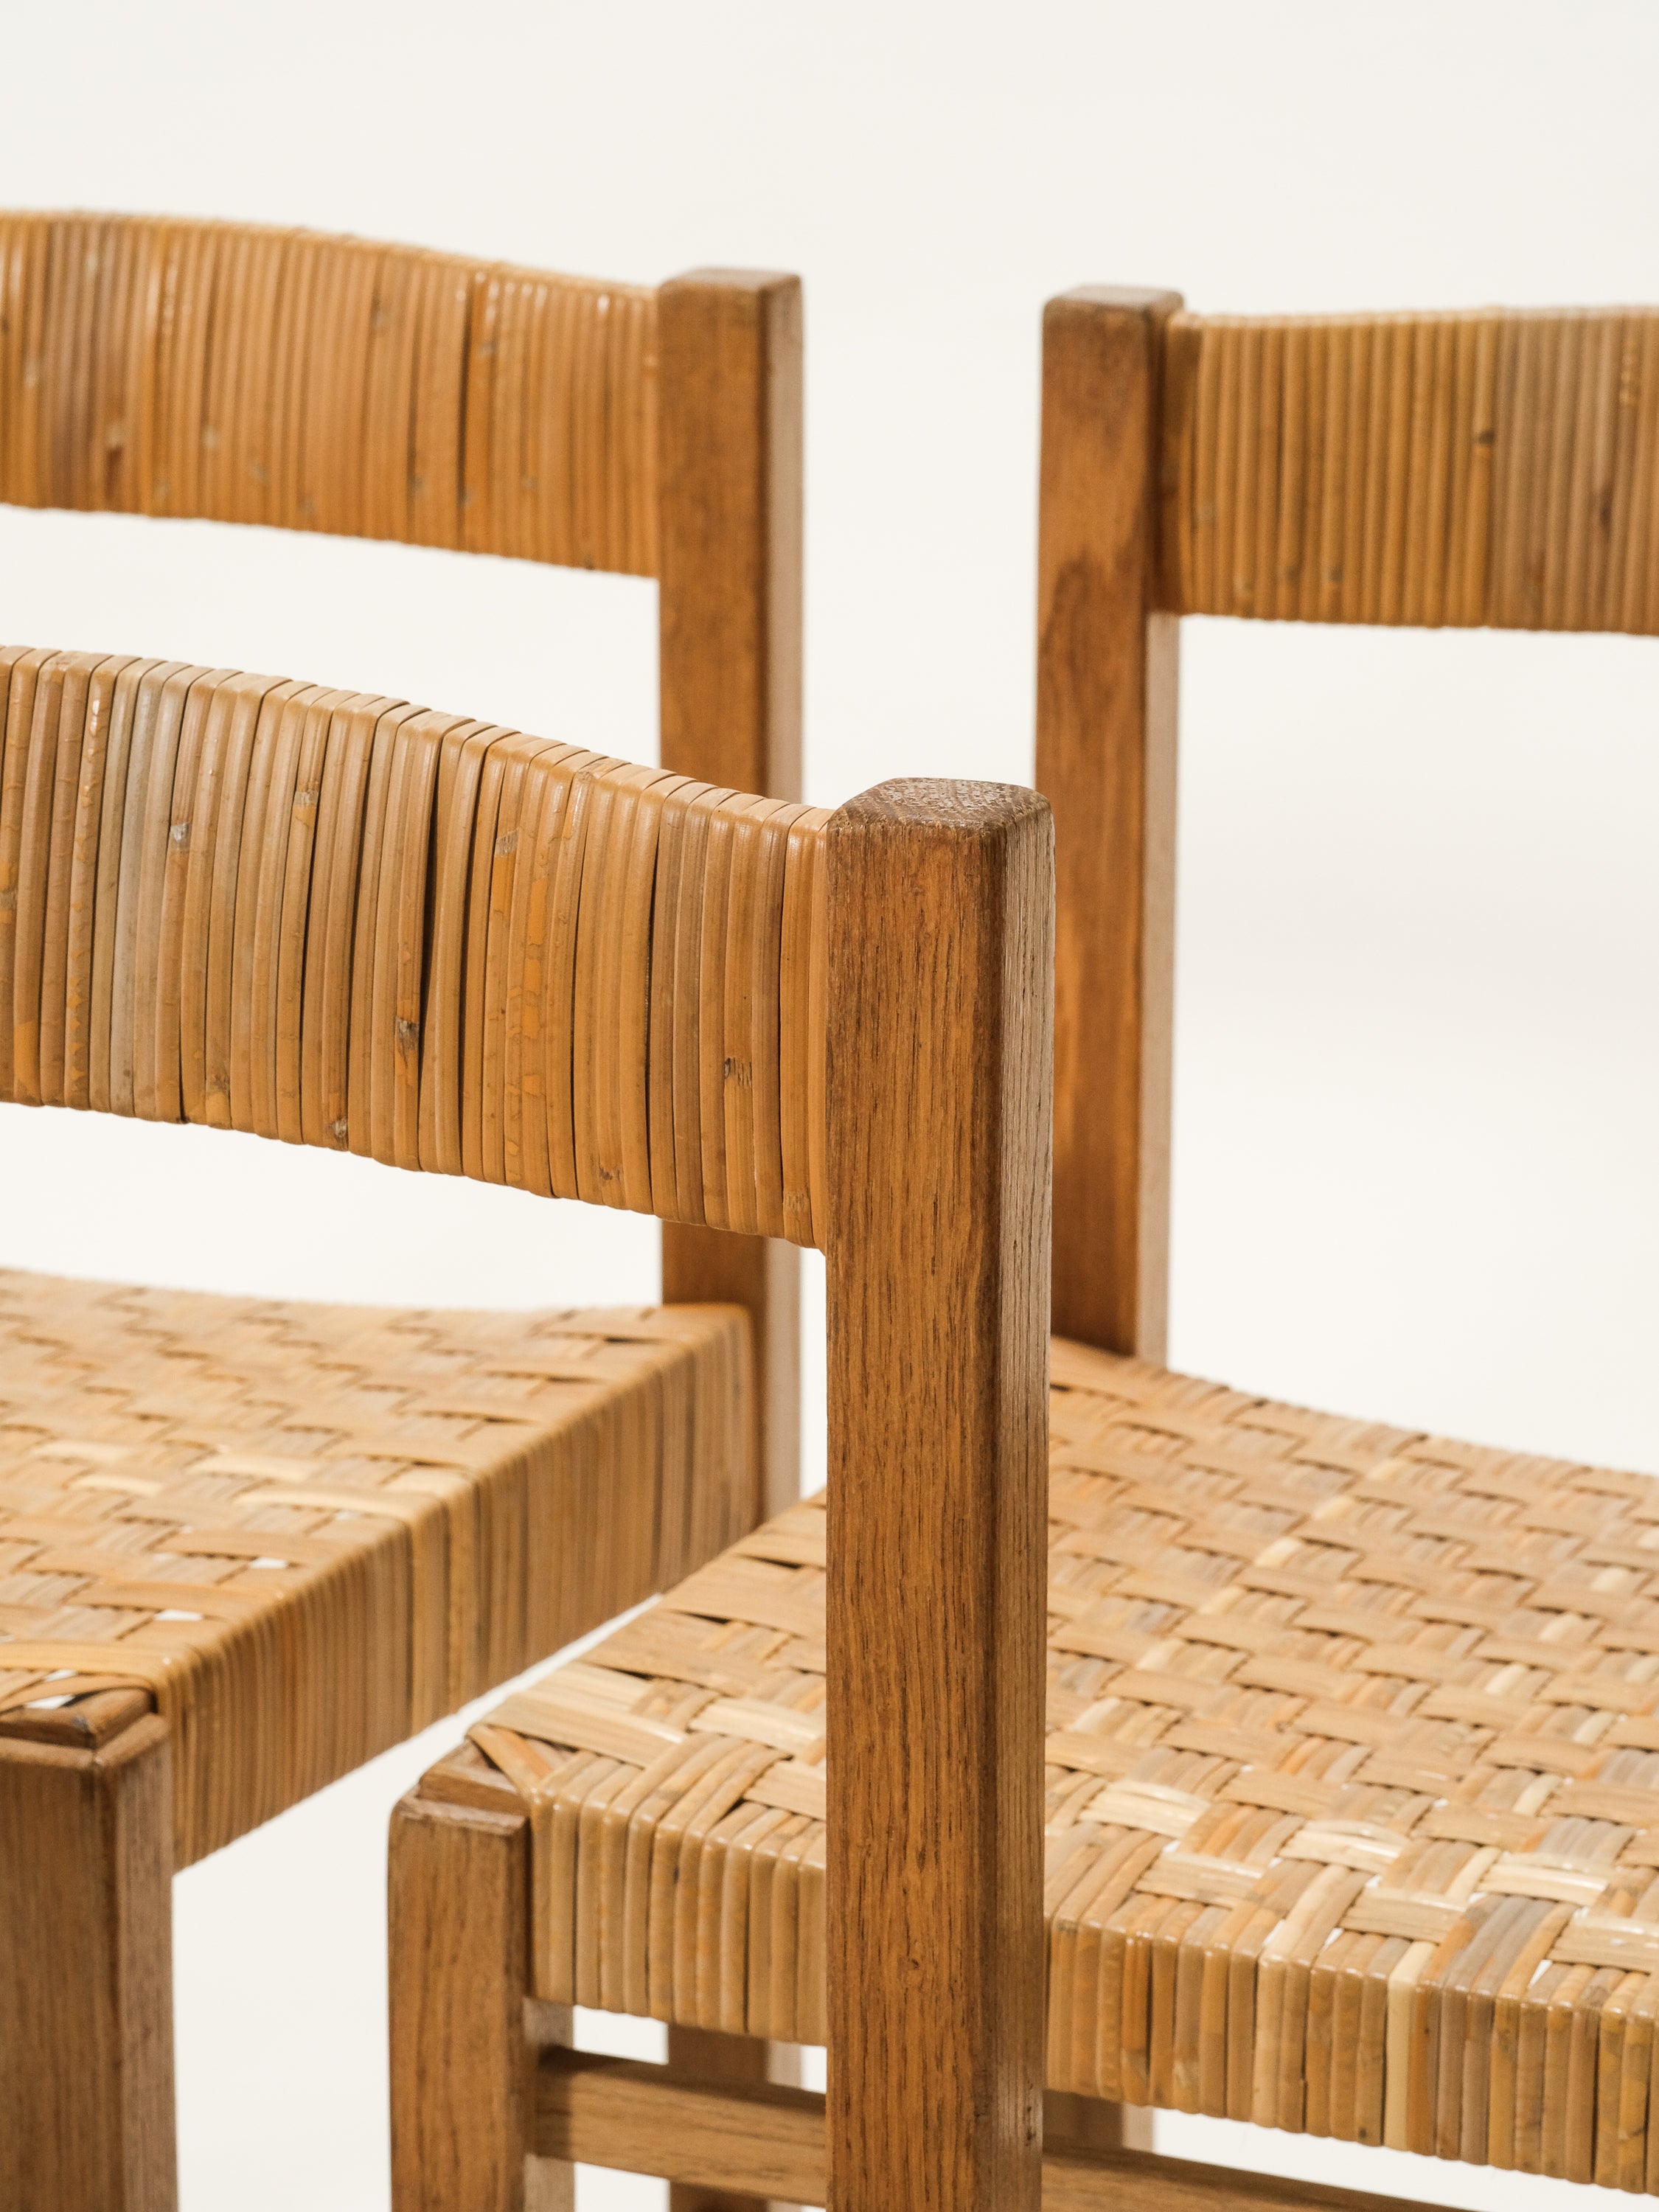 Oak & Woven Cane Dining Chairs by Reino Ruokolainen for Haimi, 1960s, Set of 6